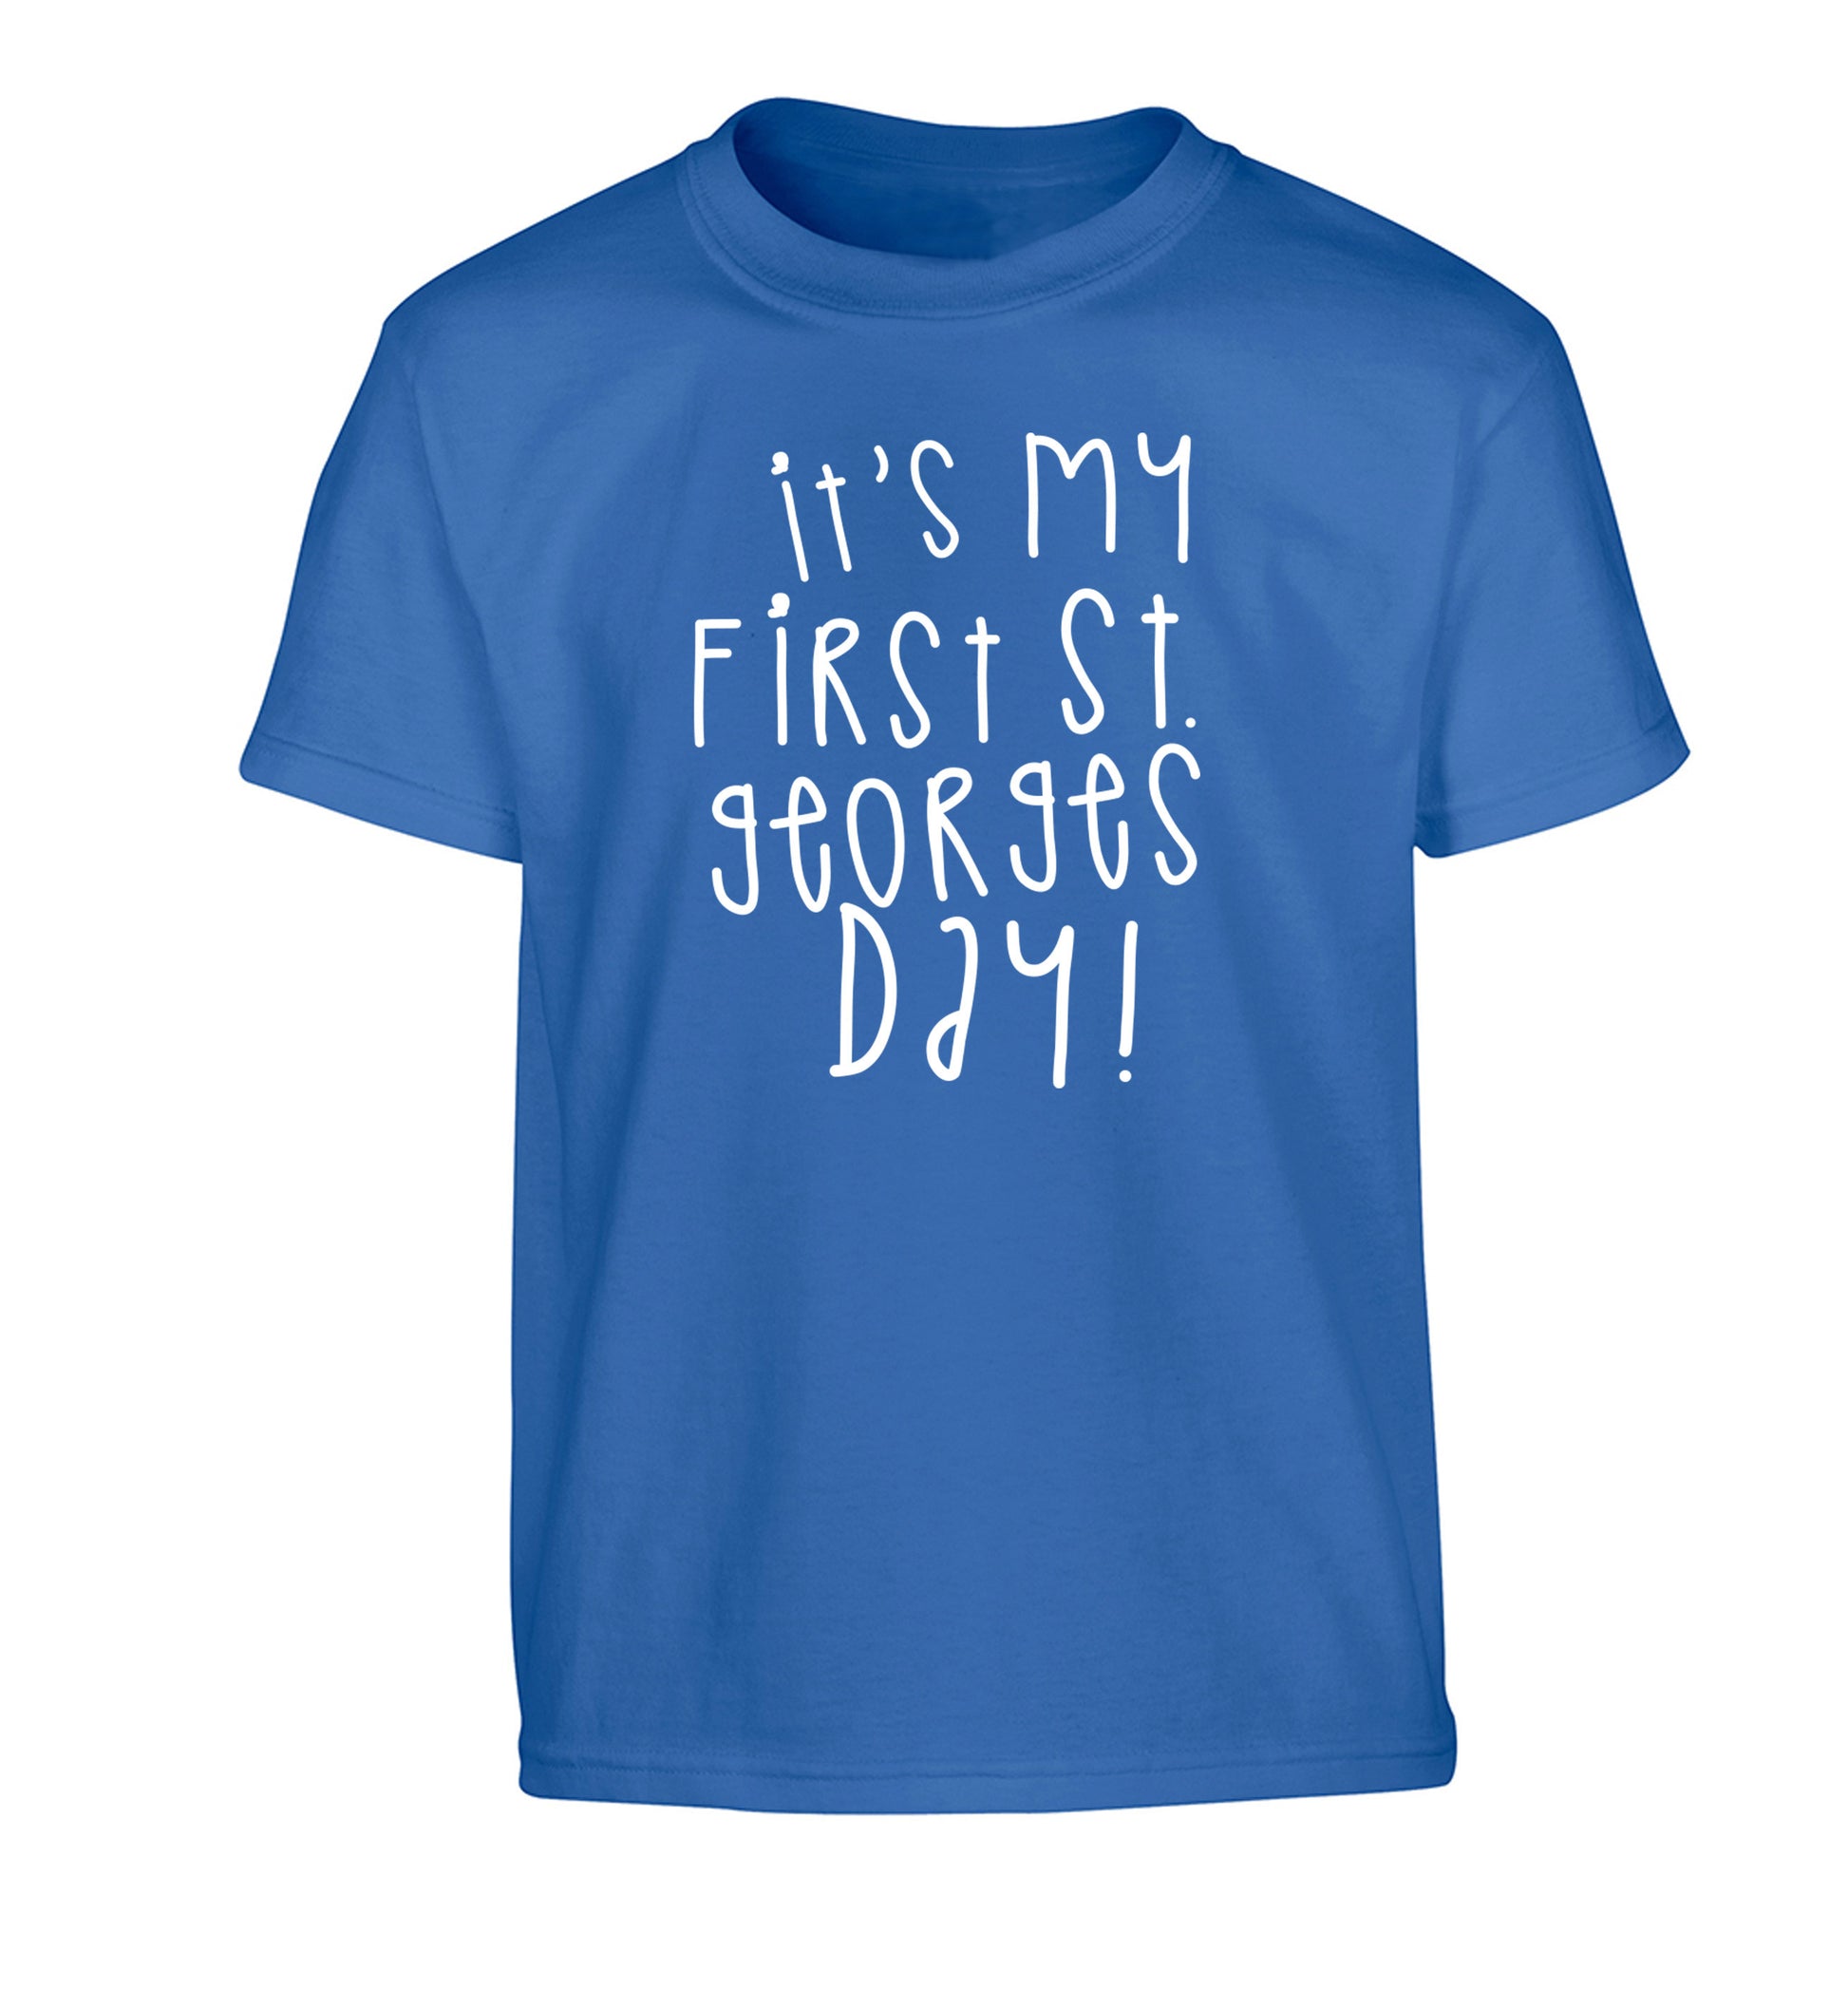 It's my first St Georges day Children's blue Tshirt 12-14 Years